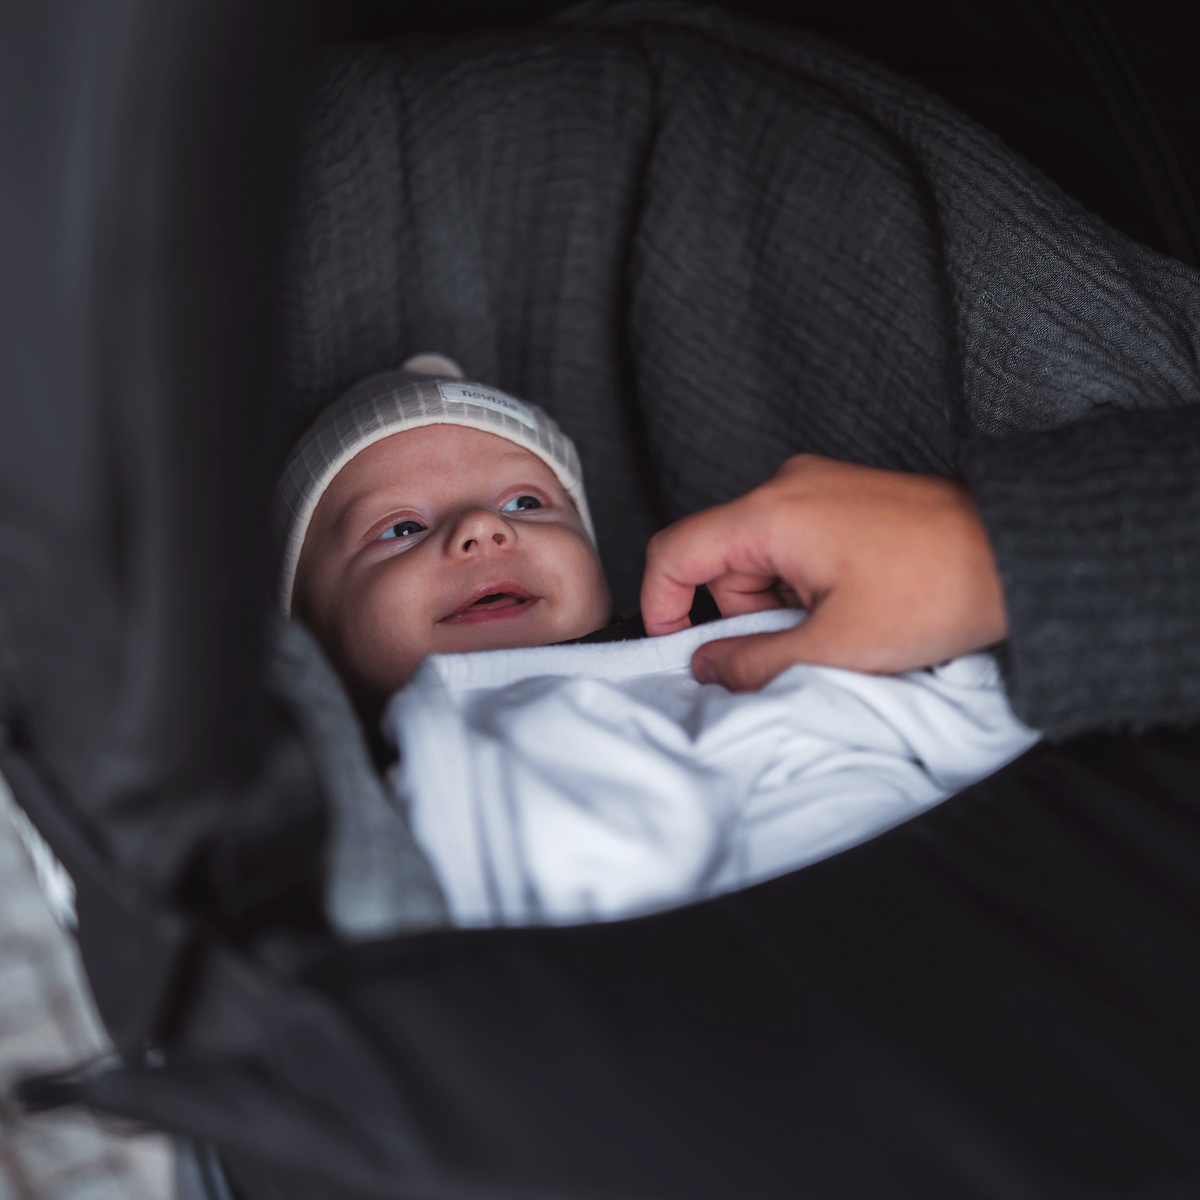 A close-up of a smiling baby inside the bassinet of a Thule Urban Glide 2 all-terrain stroller with bassinet.